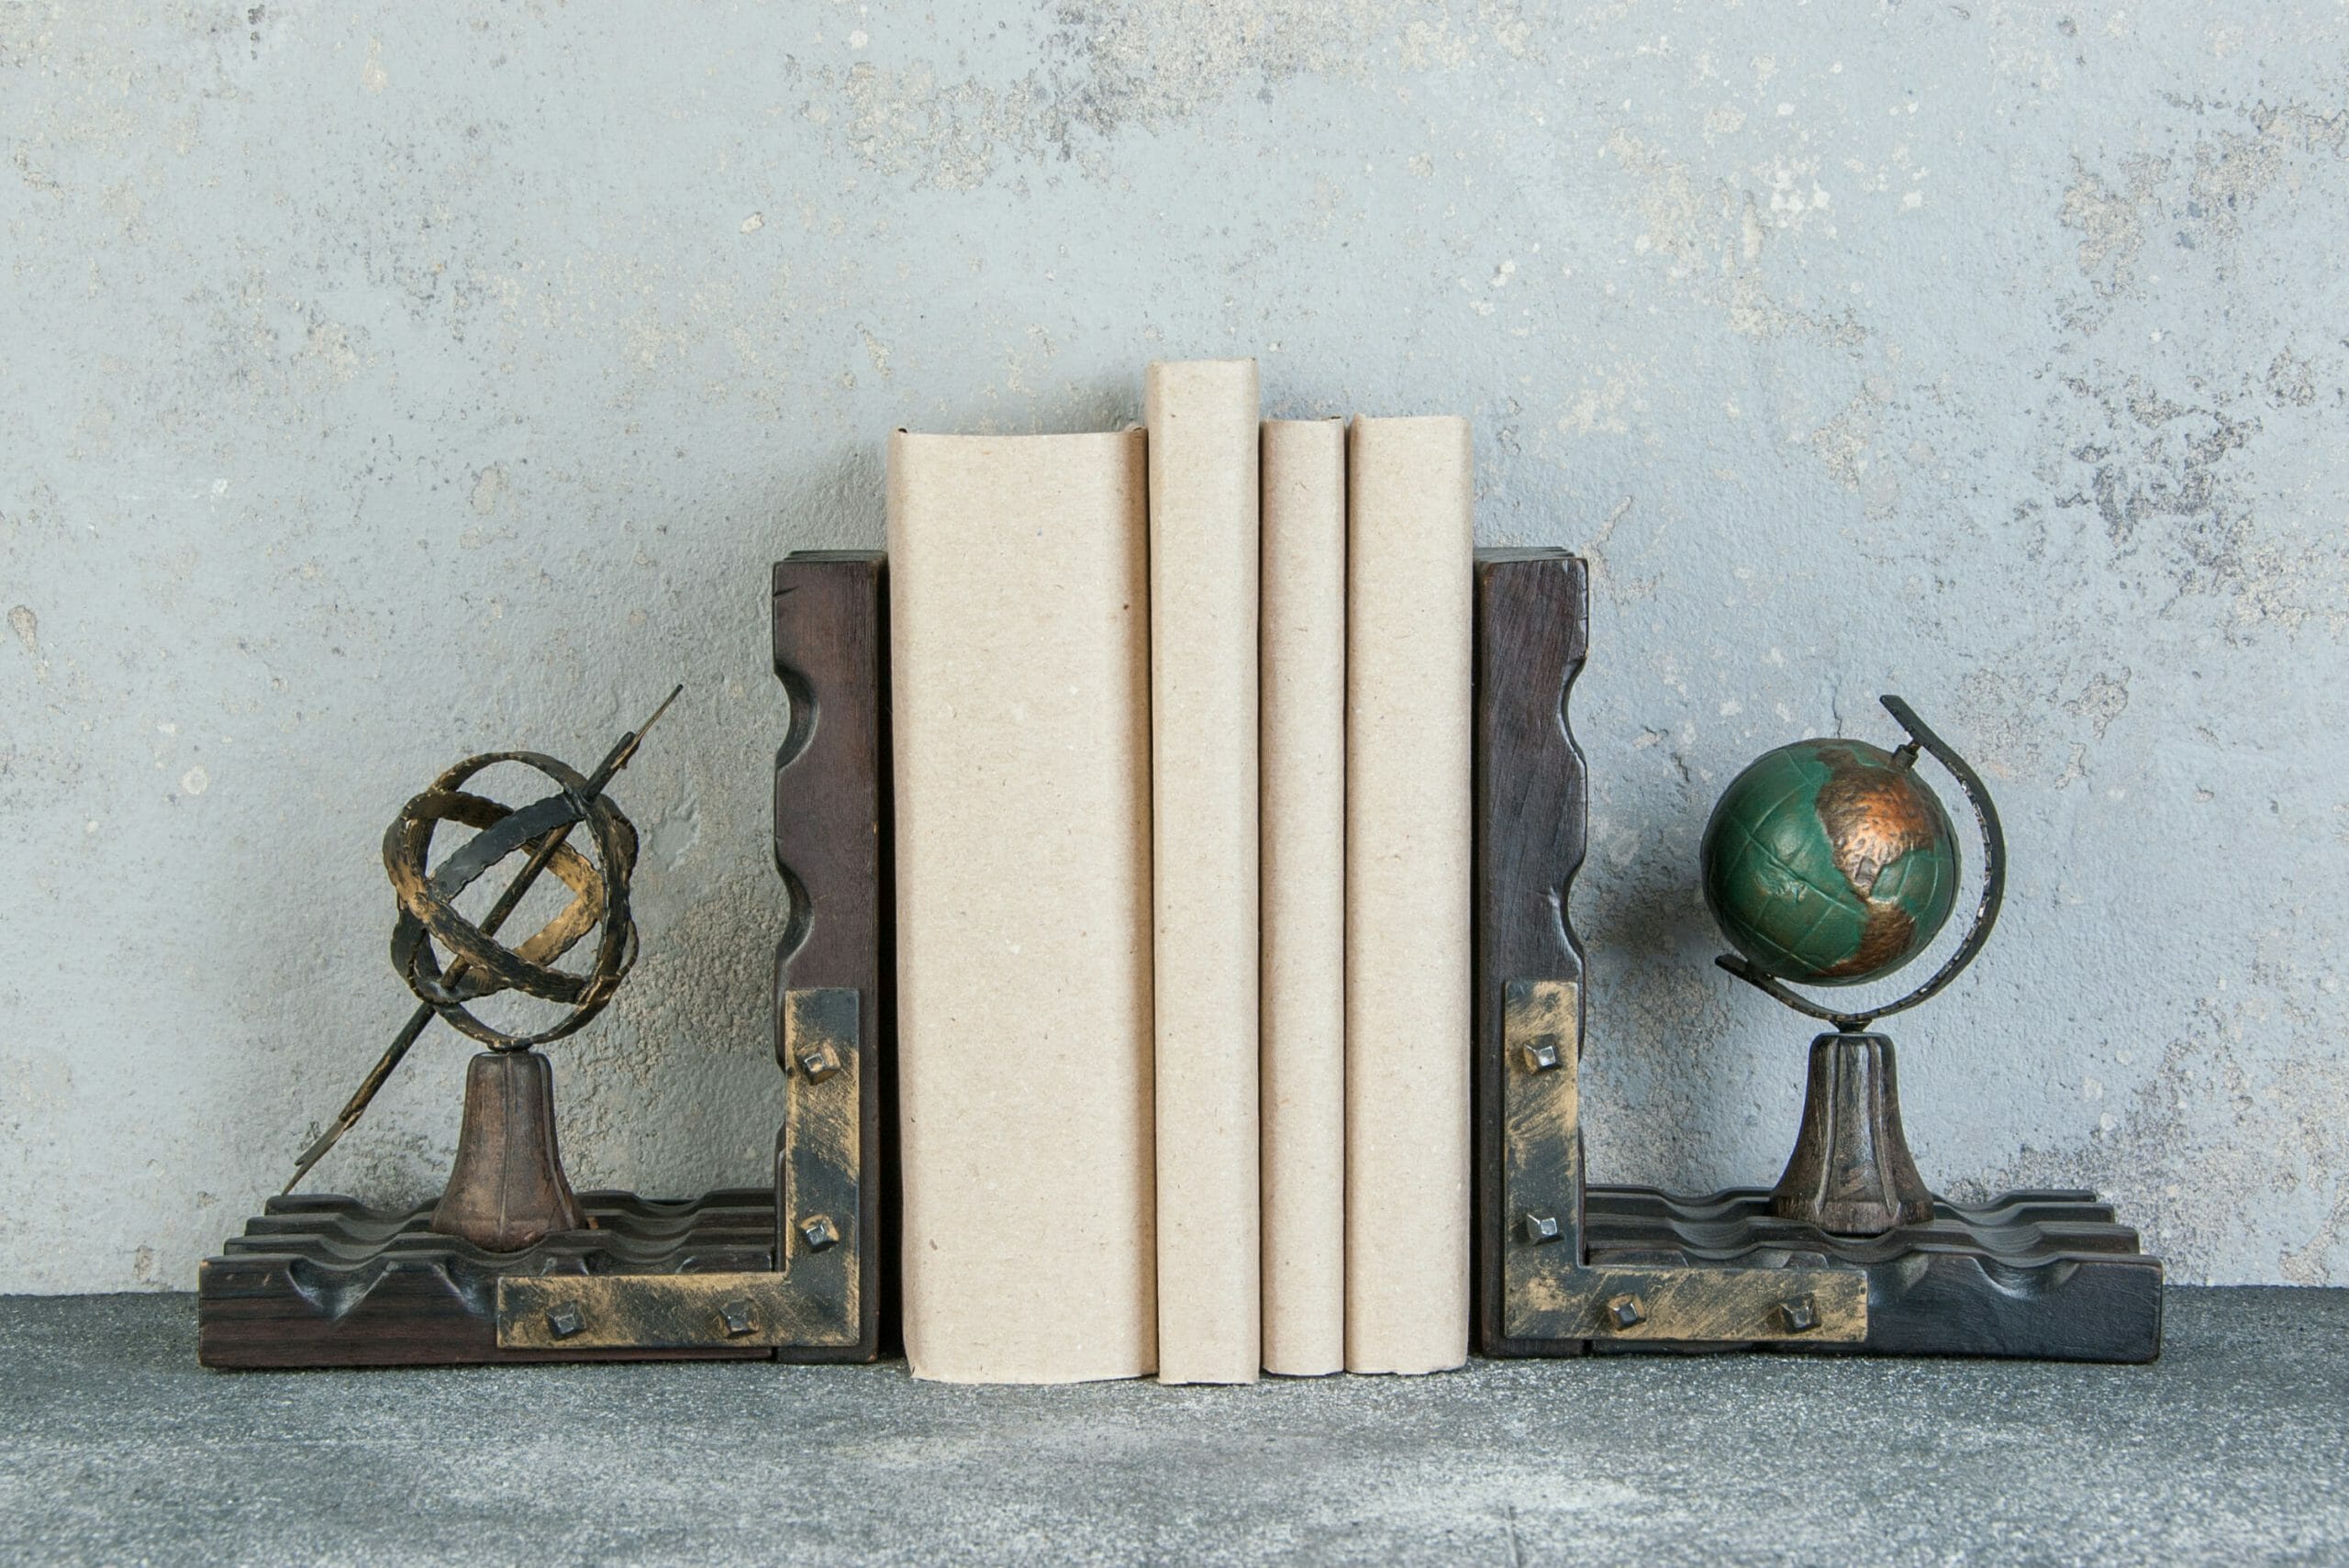 Antique book ends on a gray background